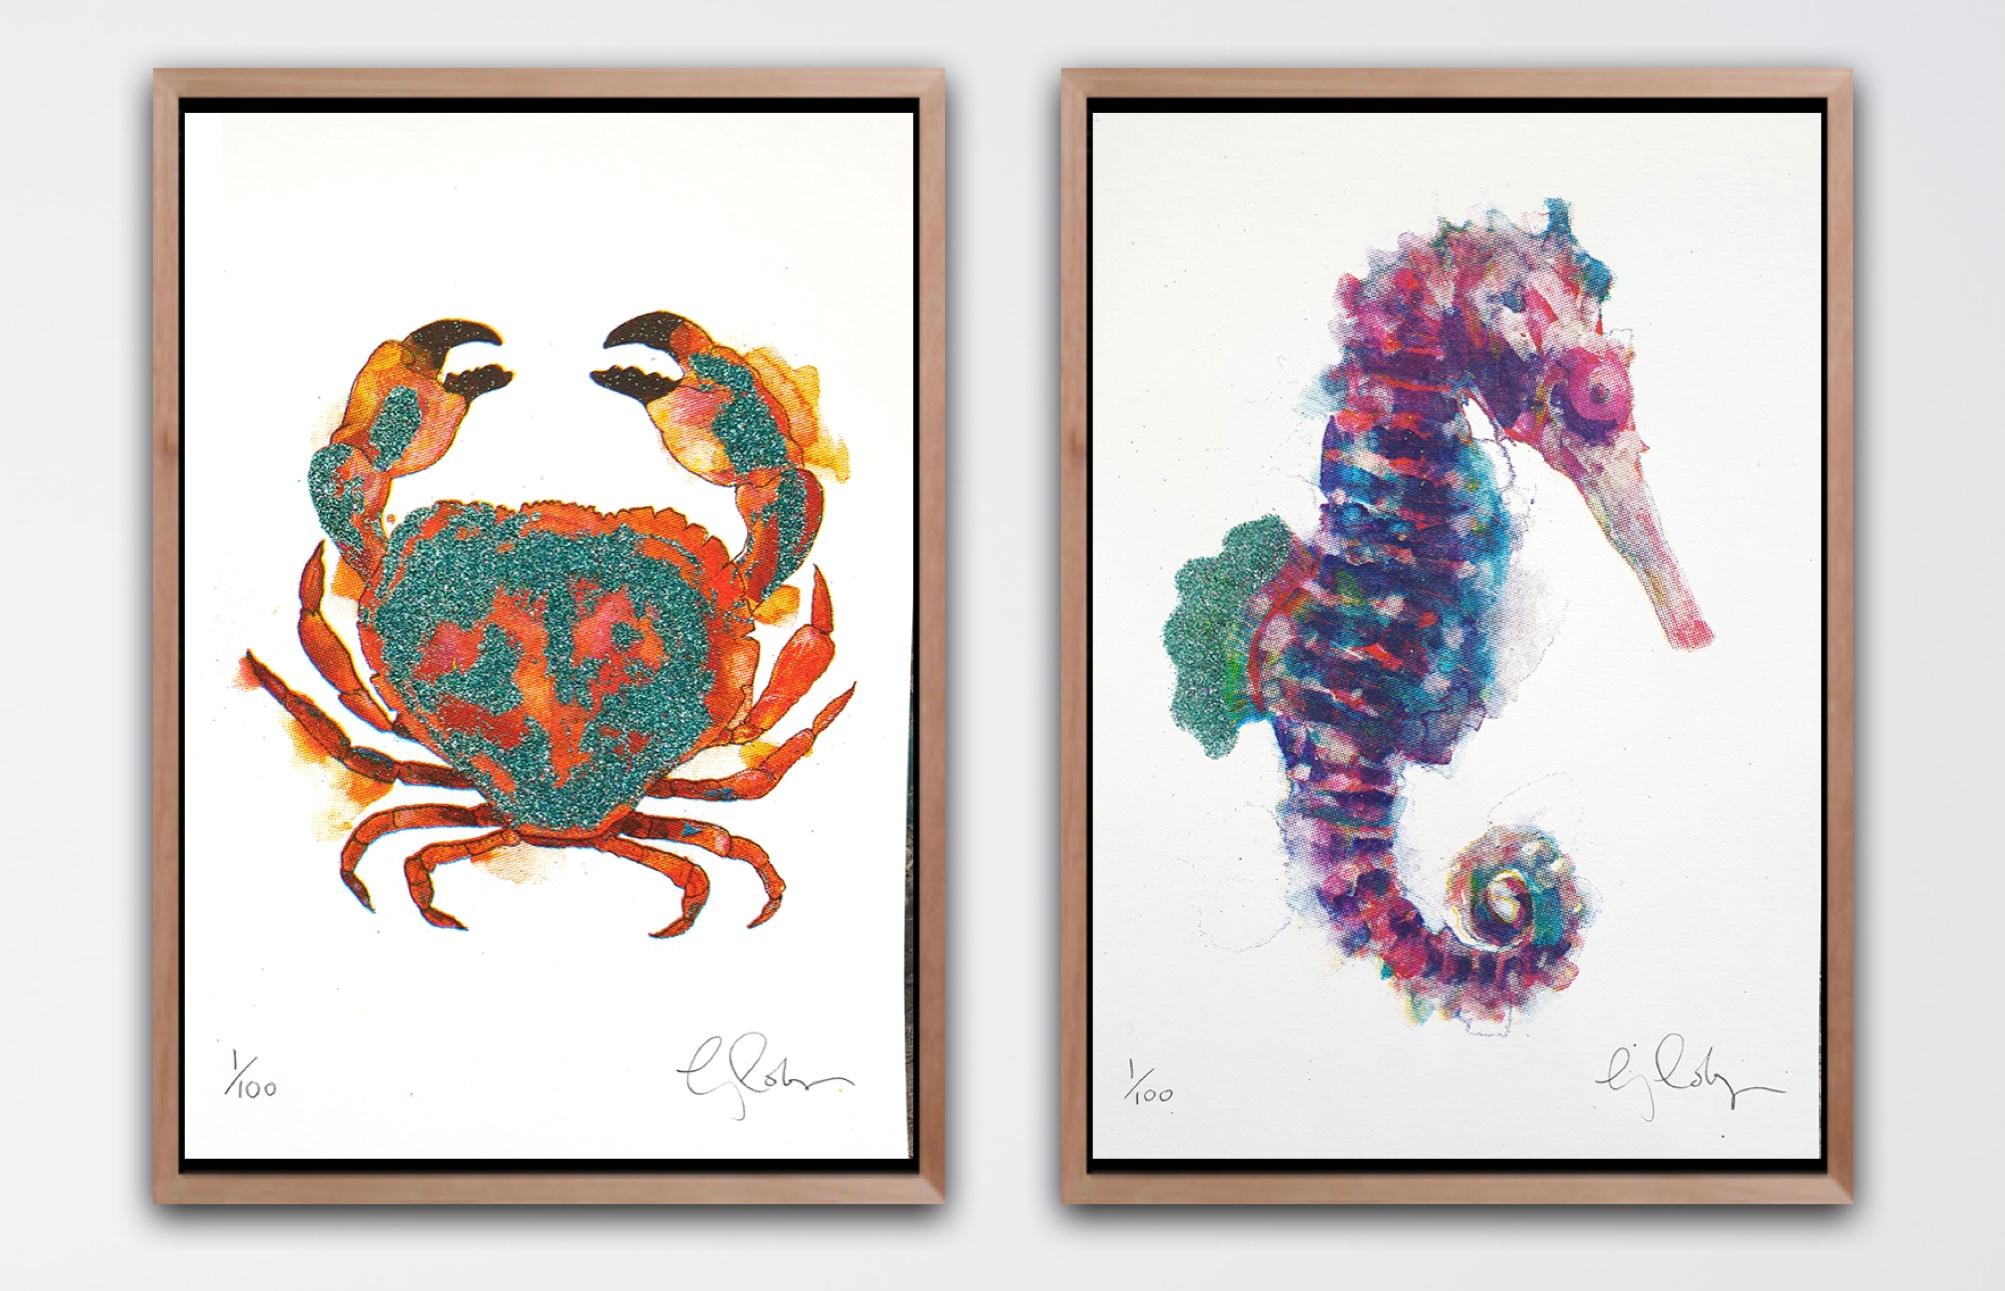 Mini Sea horse and Mini crab by Gavin Dobson, Limited edition diptych, Pop art 